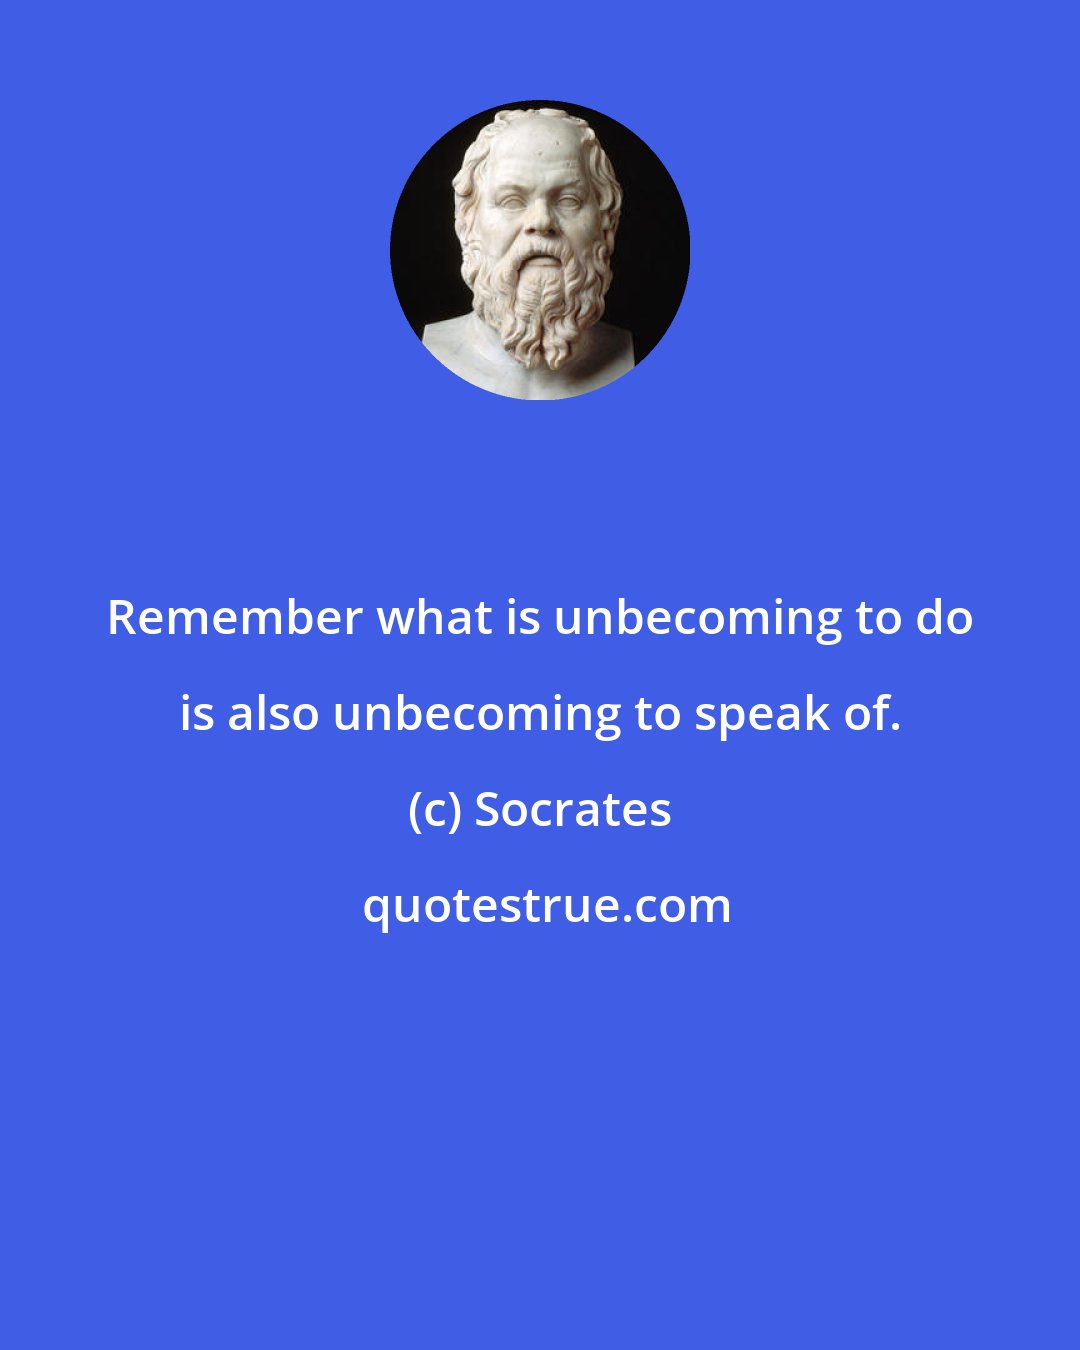 Socrates: Remember what is unbecoming to do is also unbecoming to speak of.